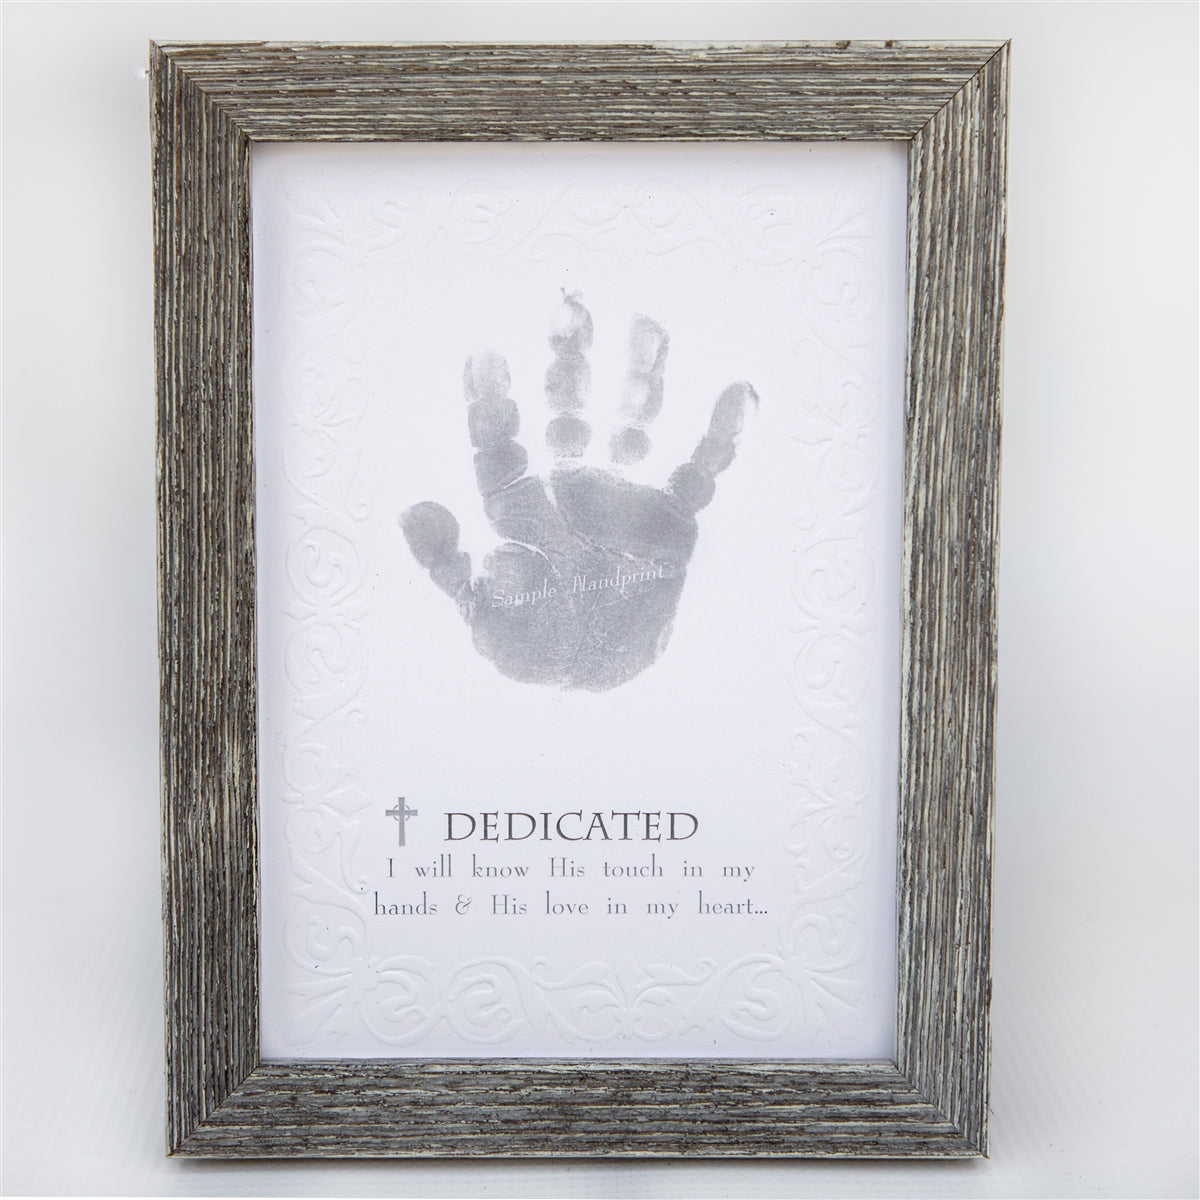 5x7 farmhouse frame with &quot;Dedicated&quot; Sentiment on embossed cardstock with space for a child&#39;s handprint.